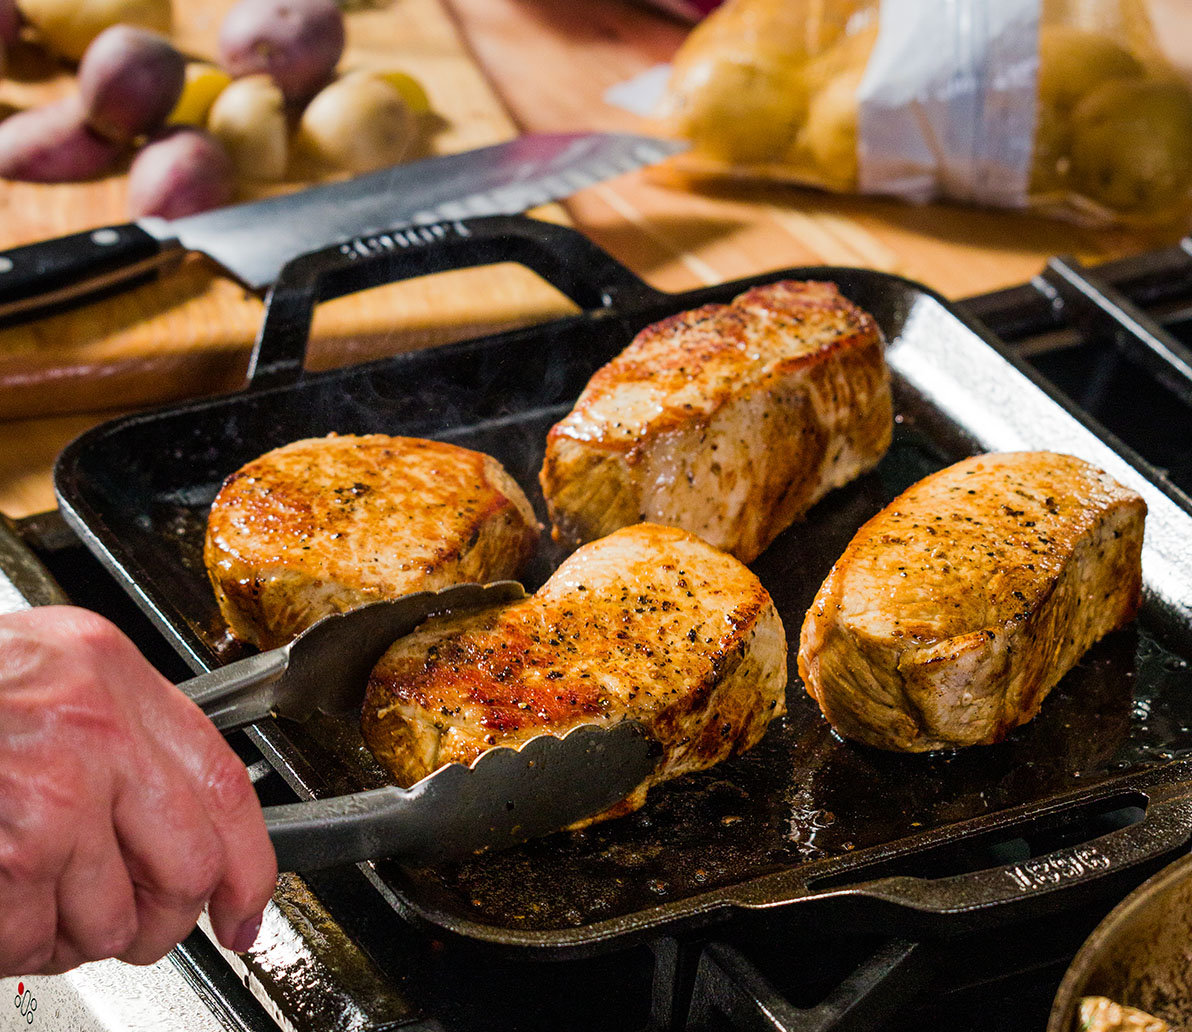 Shop for Meat & Seafood at your local Safeway Online or In-Store